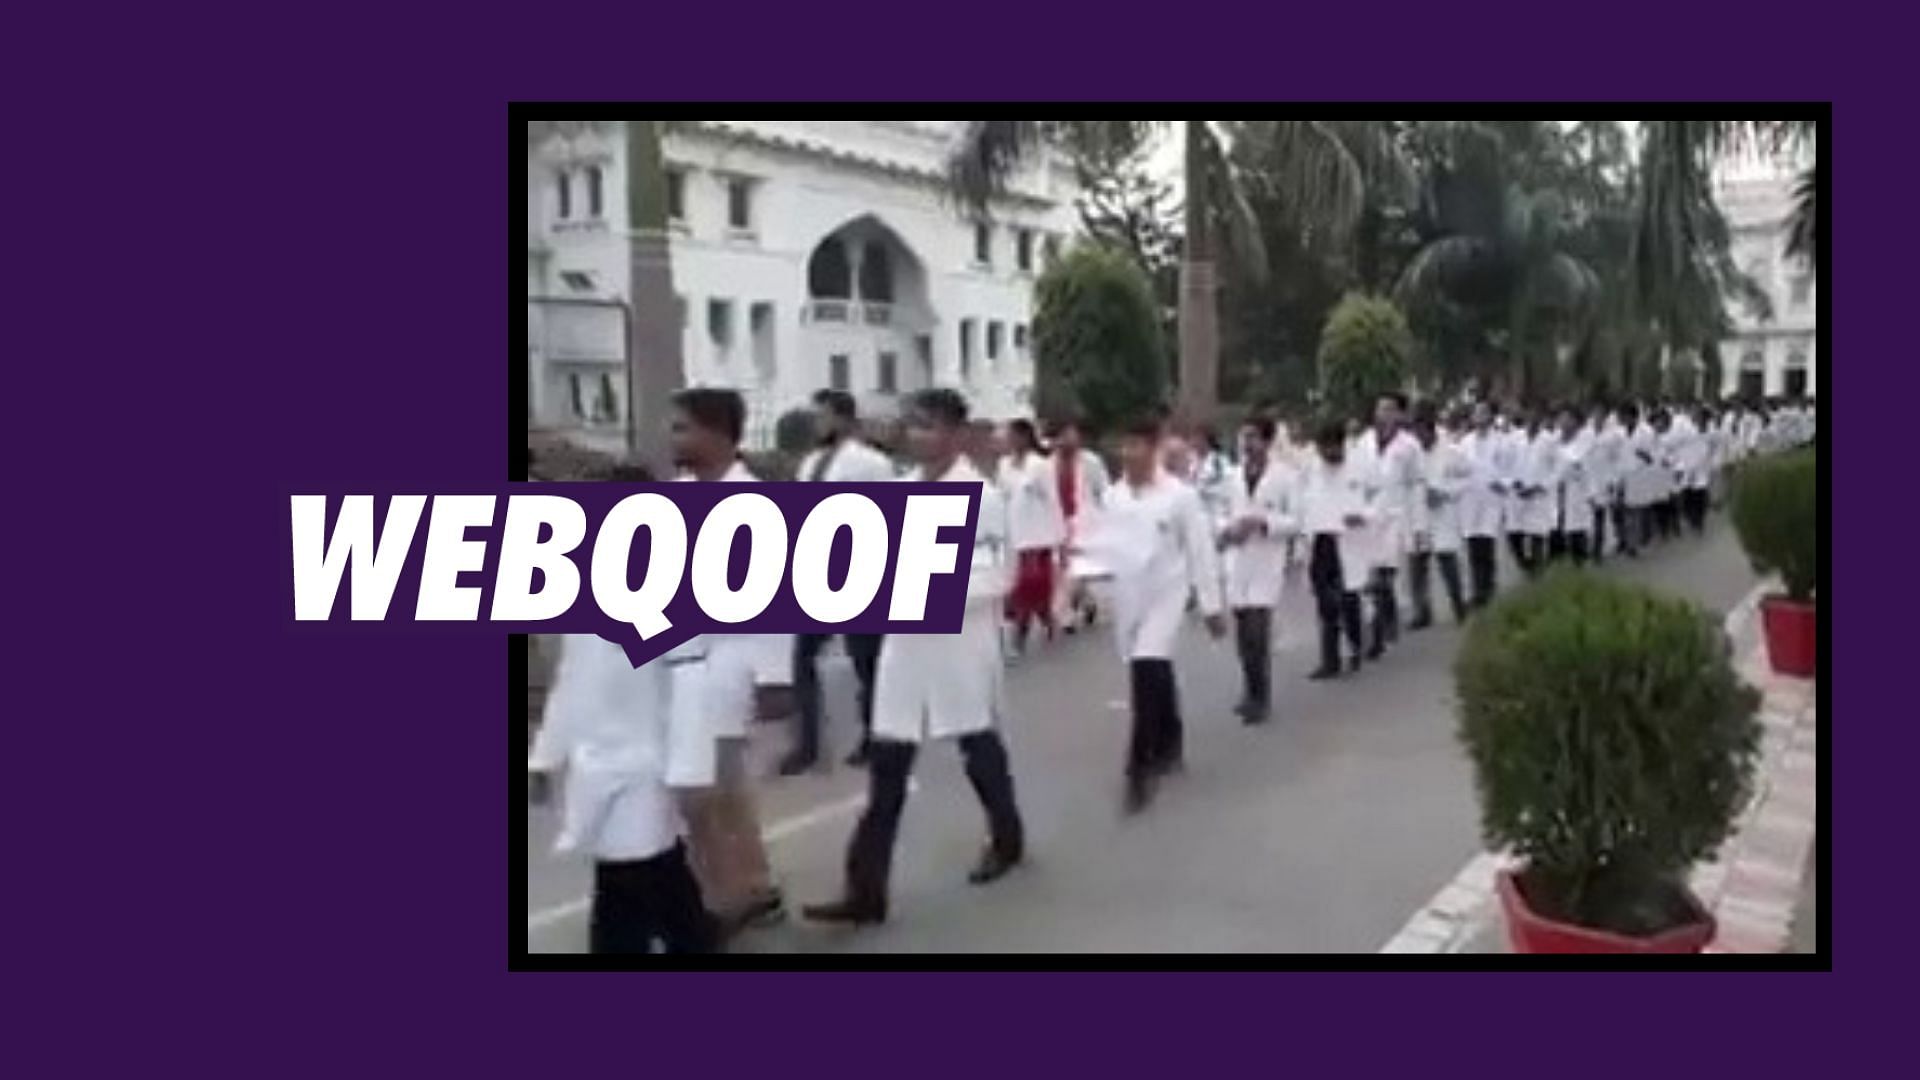 The video is not from Pakistan, but from the King George’s Medical University in Uttar Pradesh’s Lucknow.